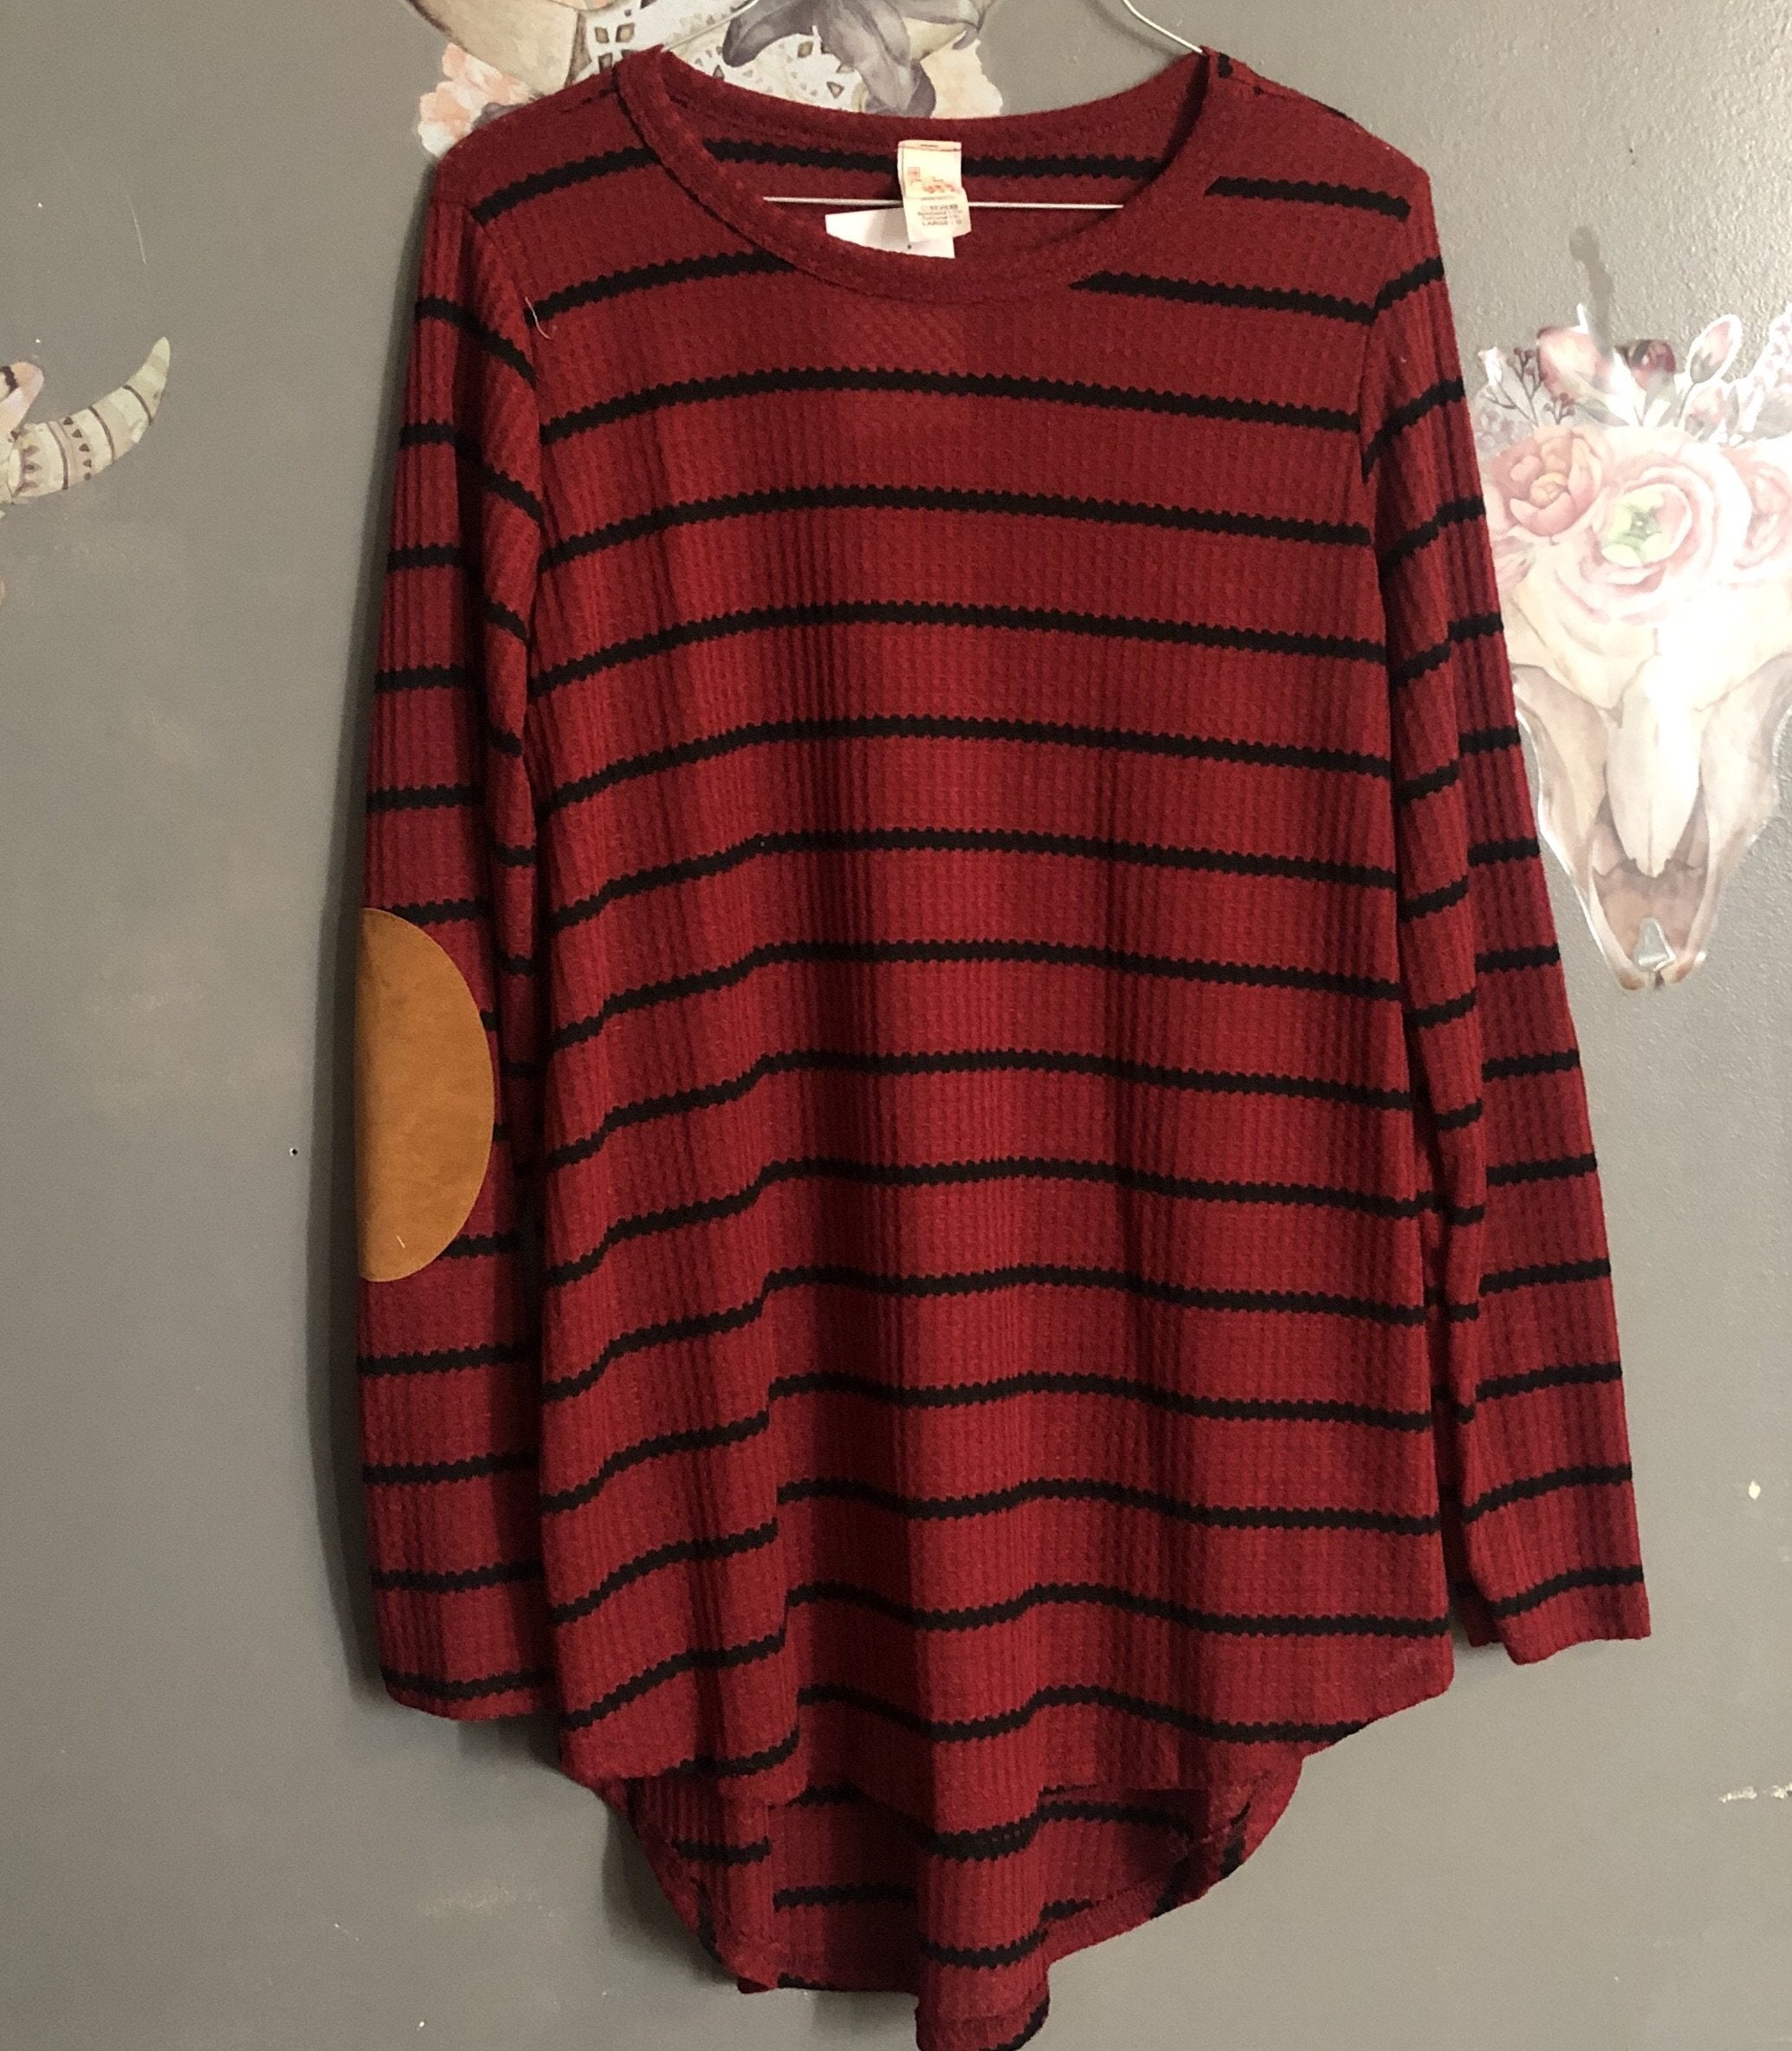 Top - Striped Elbow Patch Sweater